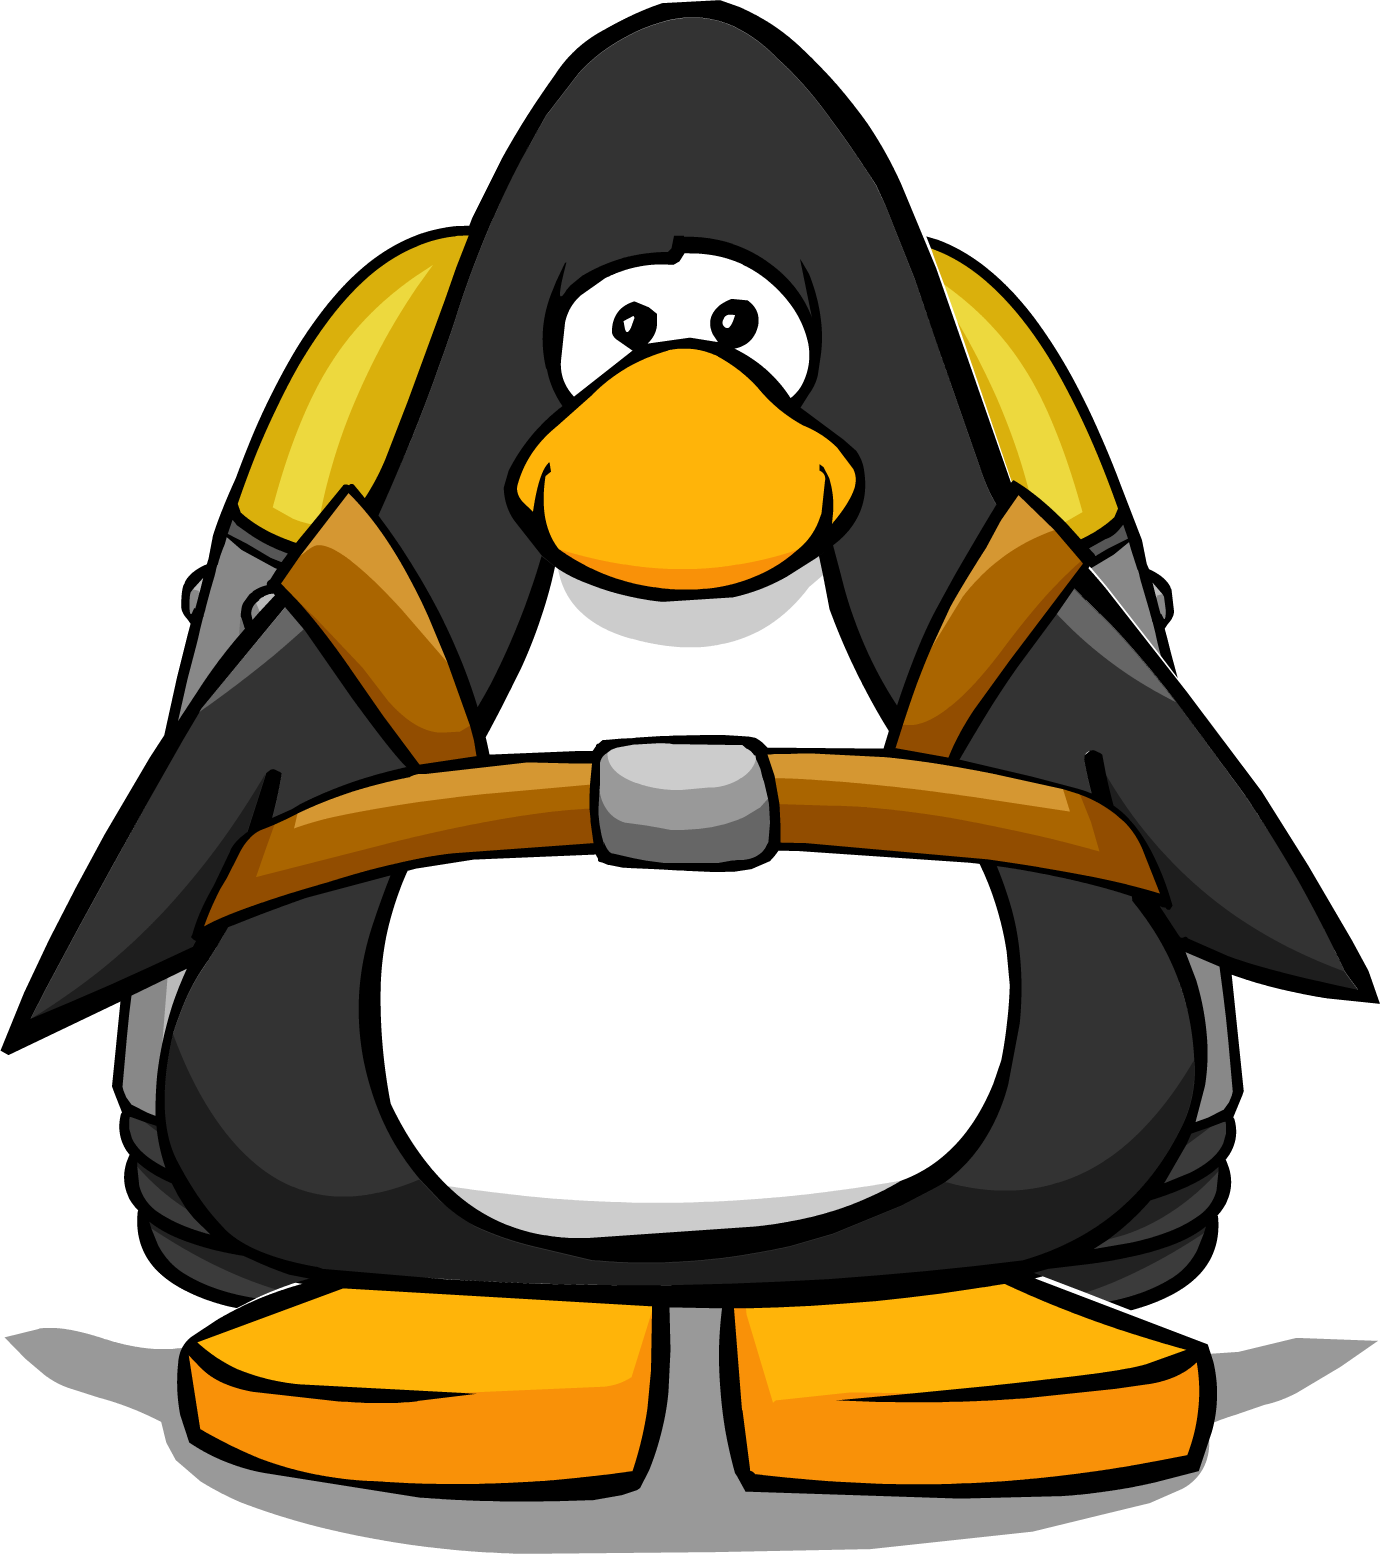 Jet Pack Item From A Player Card - Penguin With Bow Tie (1380x1554)